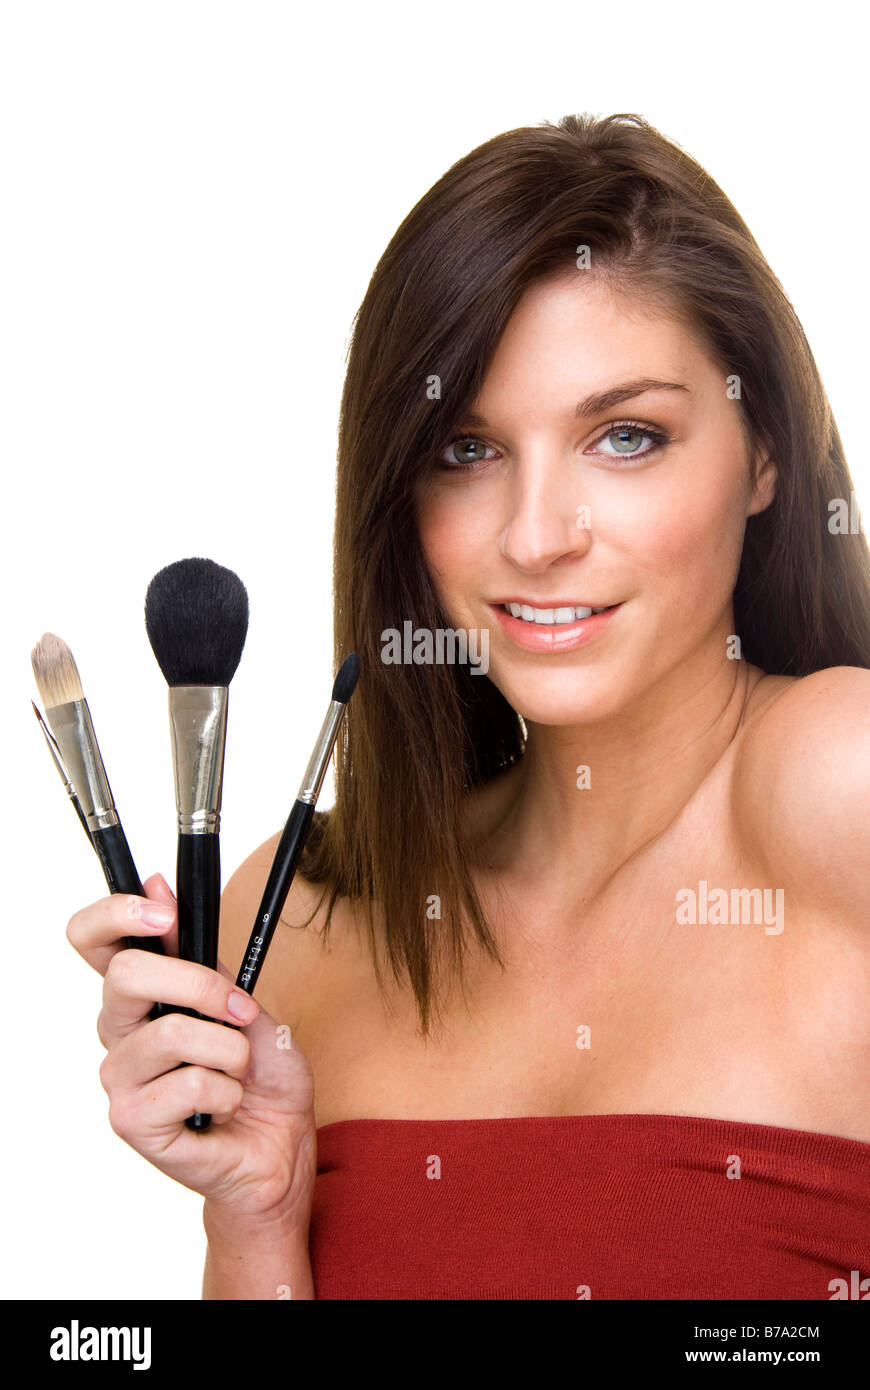 woman holding a set of make up brushes Stock Photo